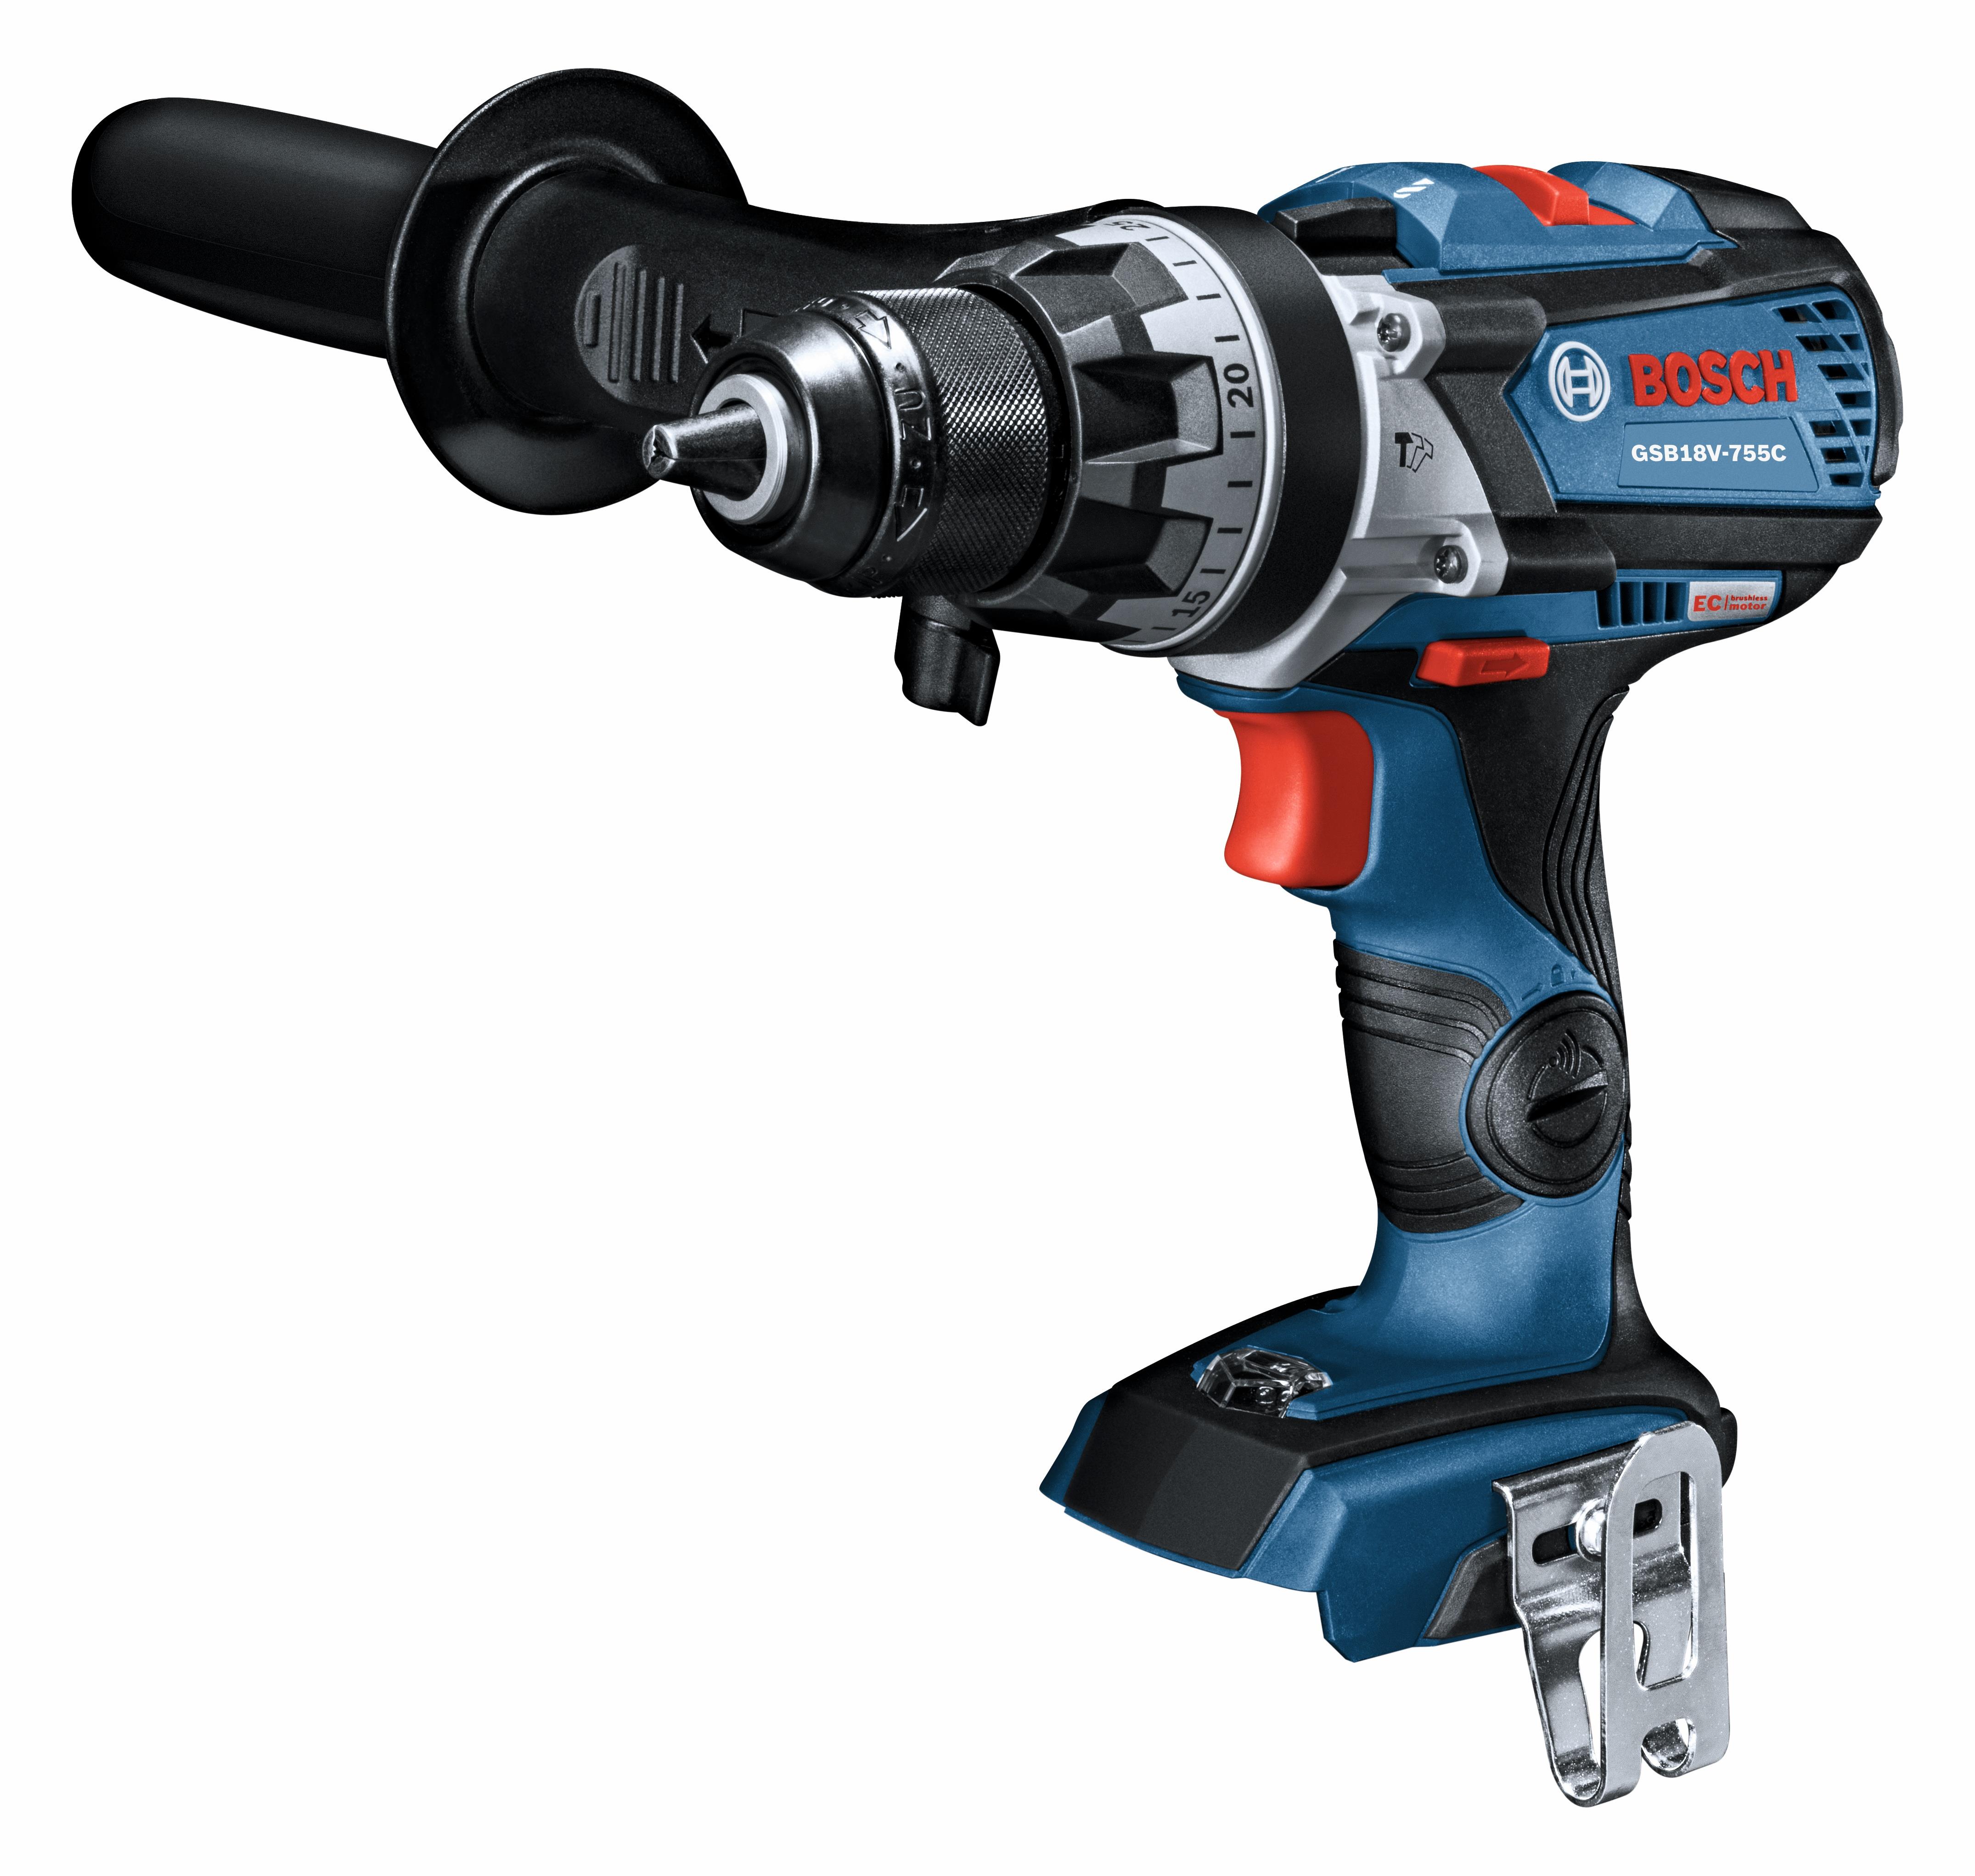 Bosch EC Brushless Connected-Ready Brute Tough 1/2" Hammer Drill/Driver (Bare Tool) - White Cap